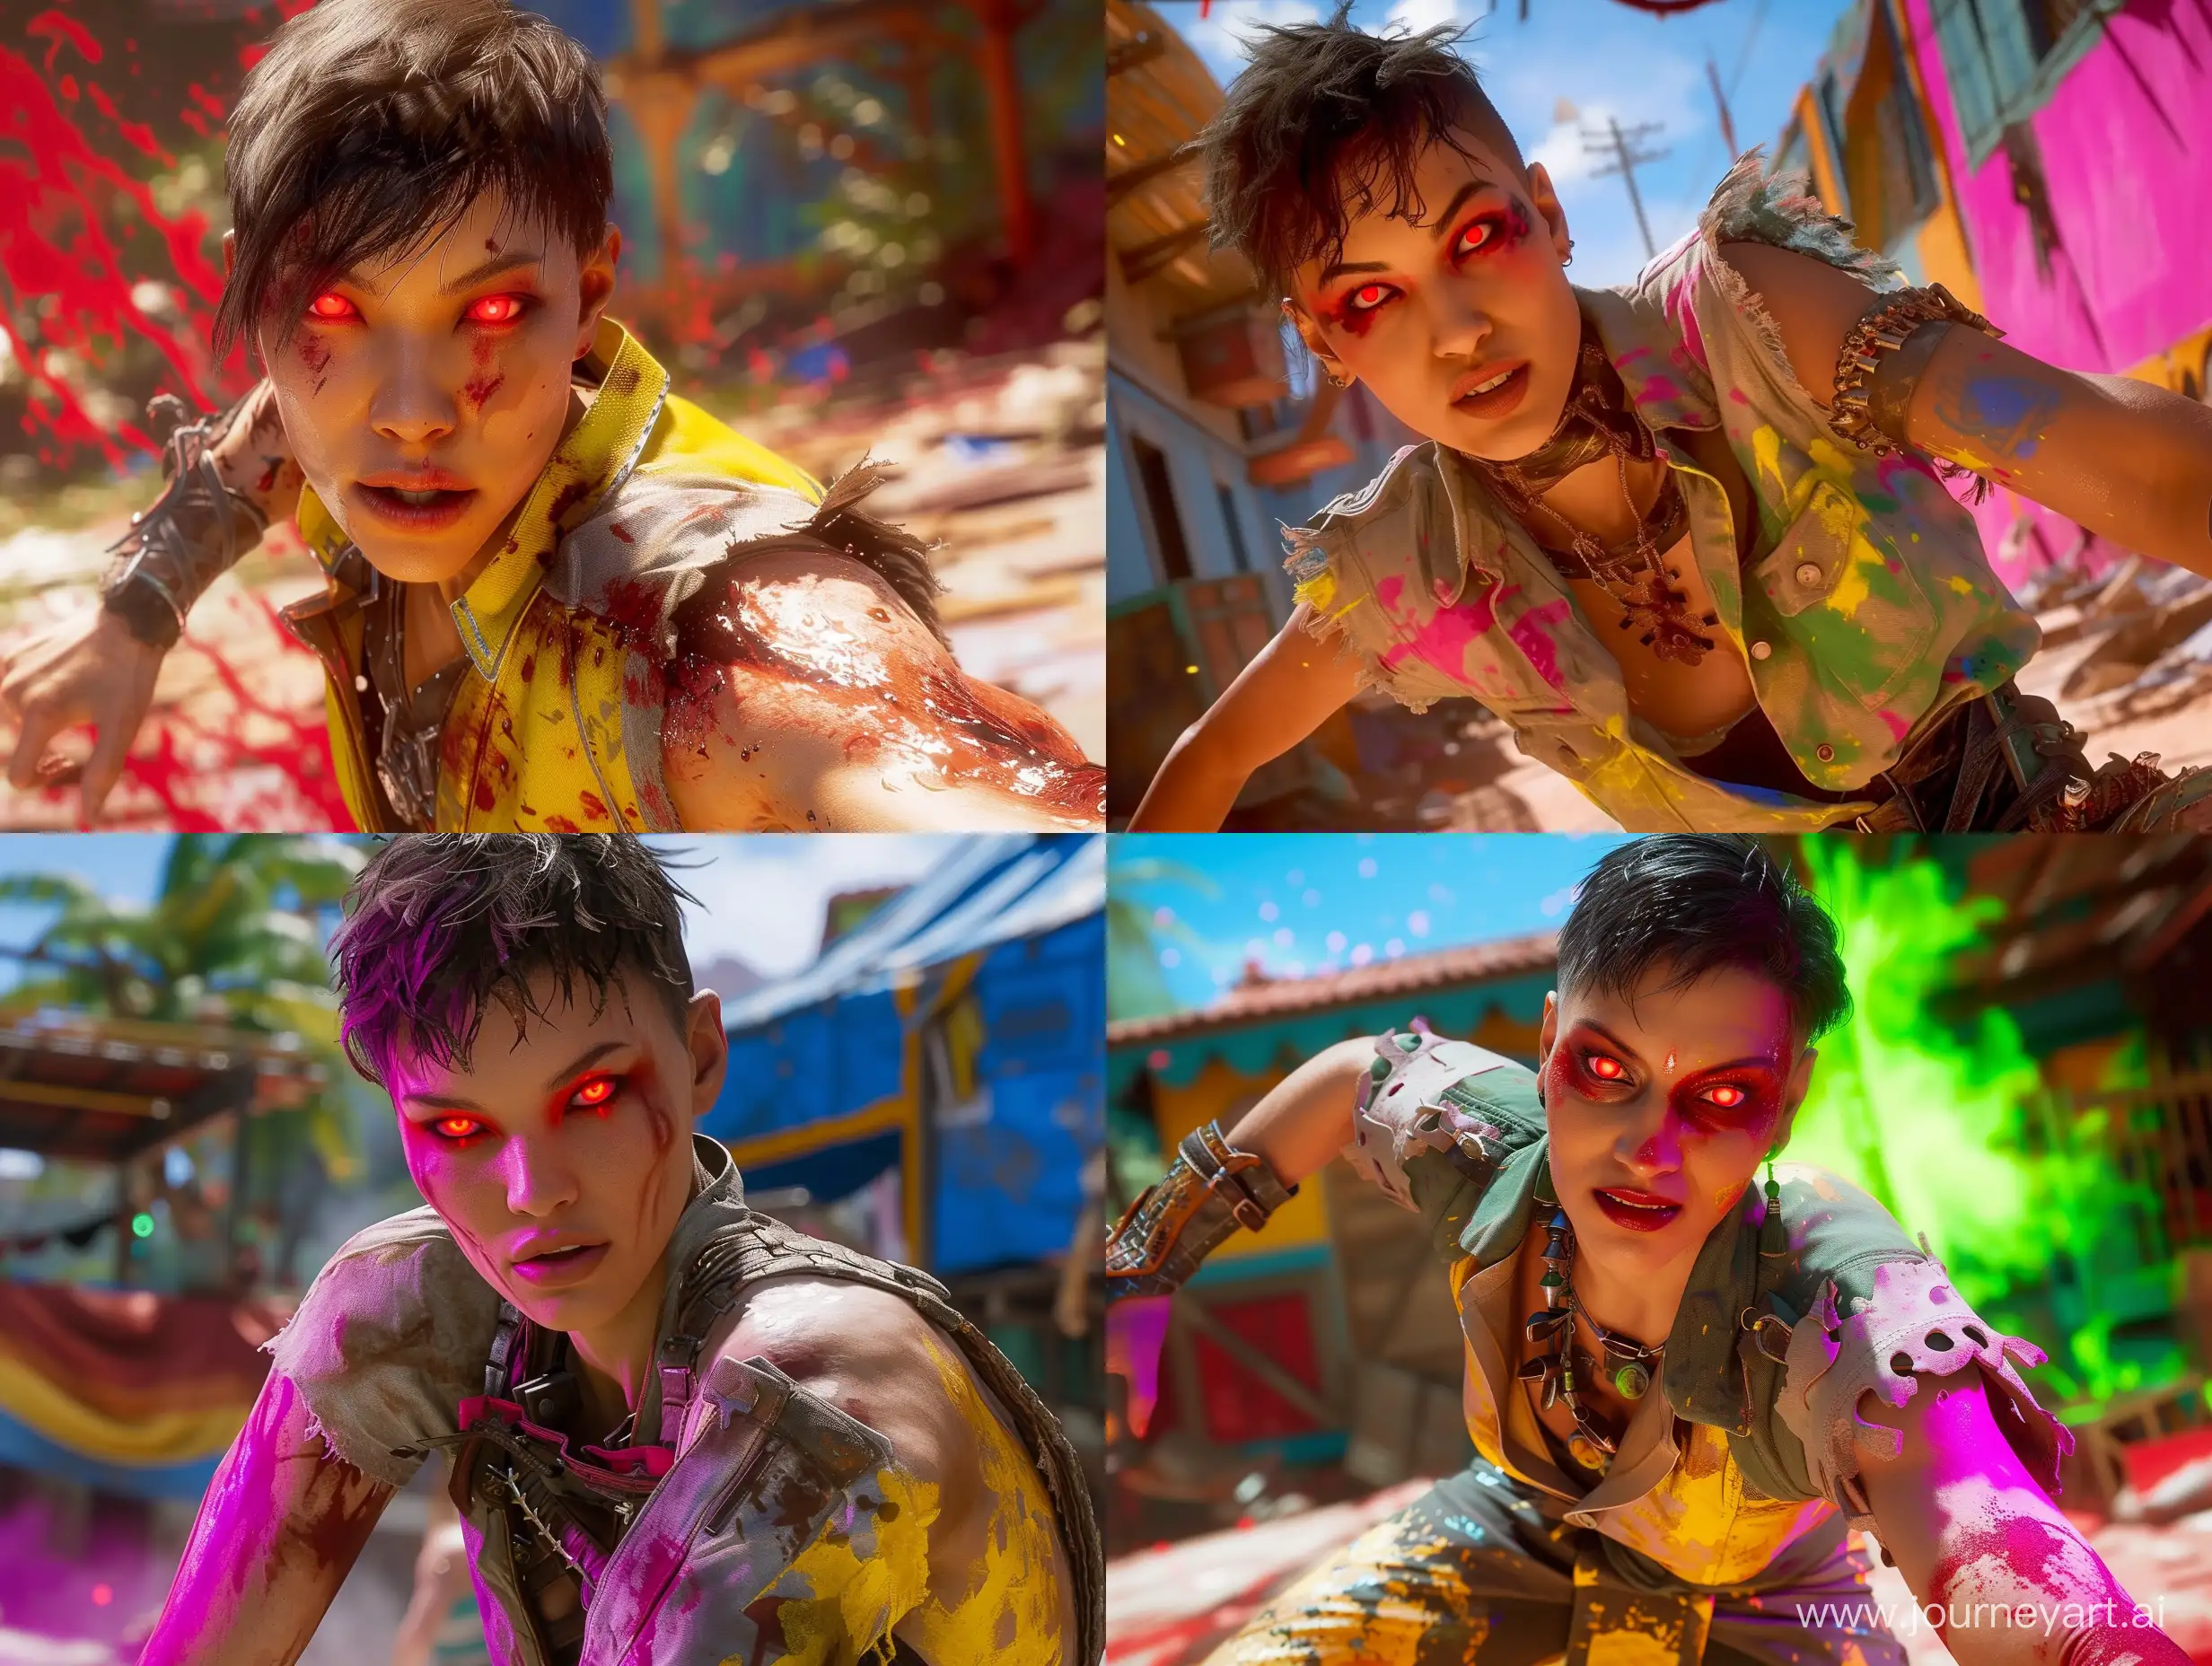 An image from Mortal Kombat 11 featuring a female character with short hair and red eyes, wearing a shirt and accessories, posing outside with vibrant colors, providing a full view.

